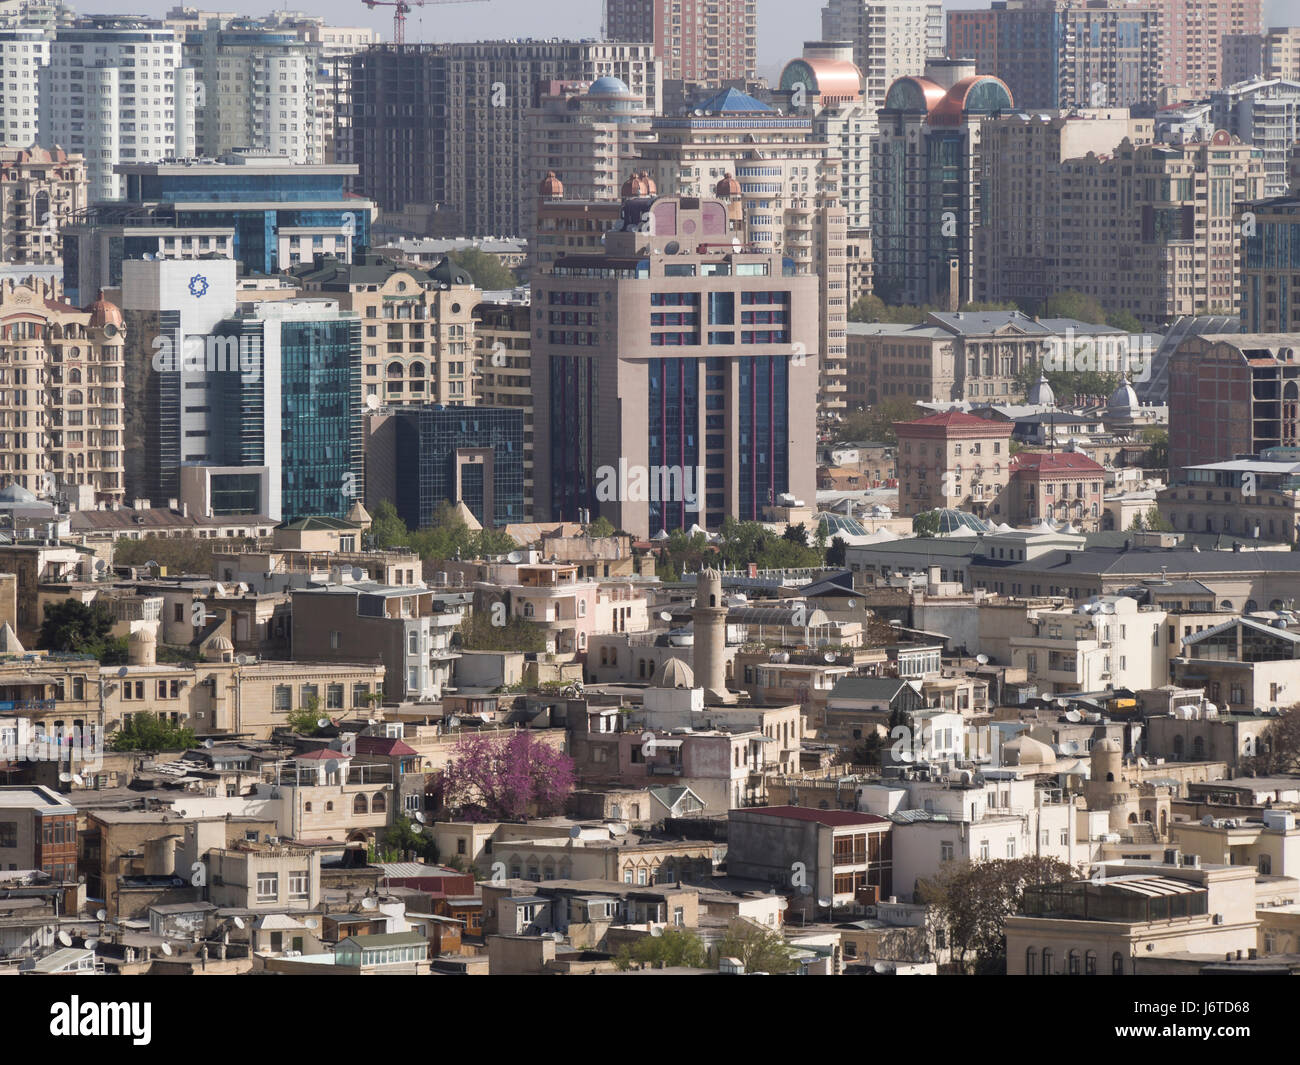 Baku, the capital city of Azerbaijan, on the shore of the Caspian sea, view of inner city highrises  and the old town, from the Dagustu park Stock Photo